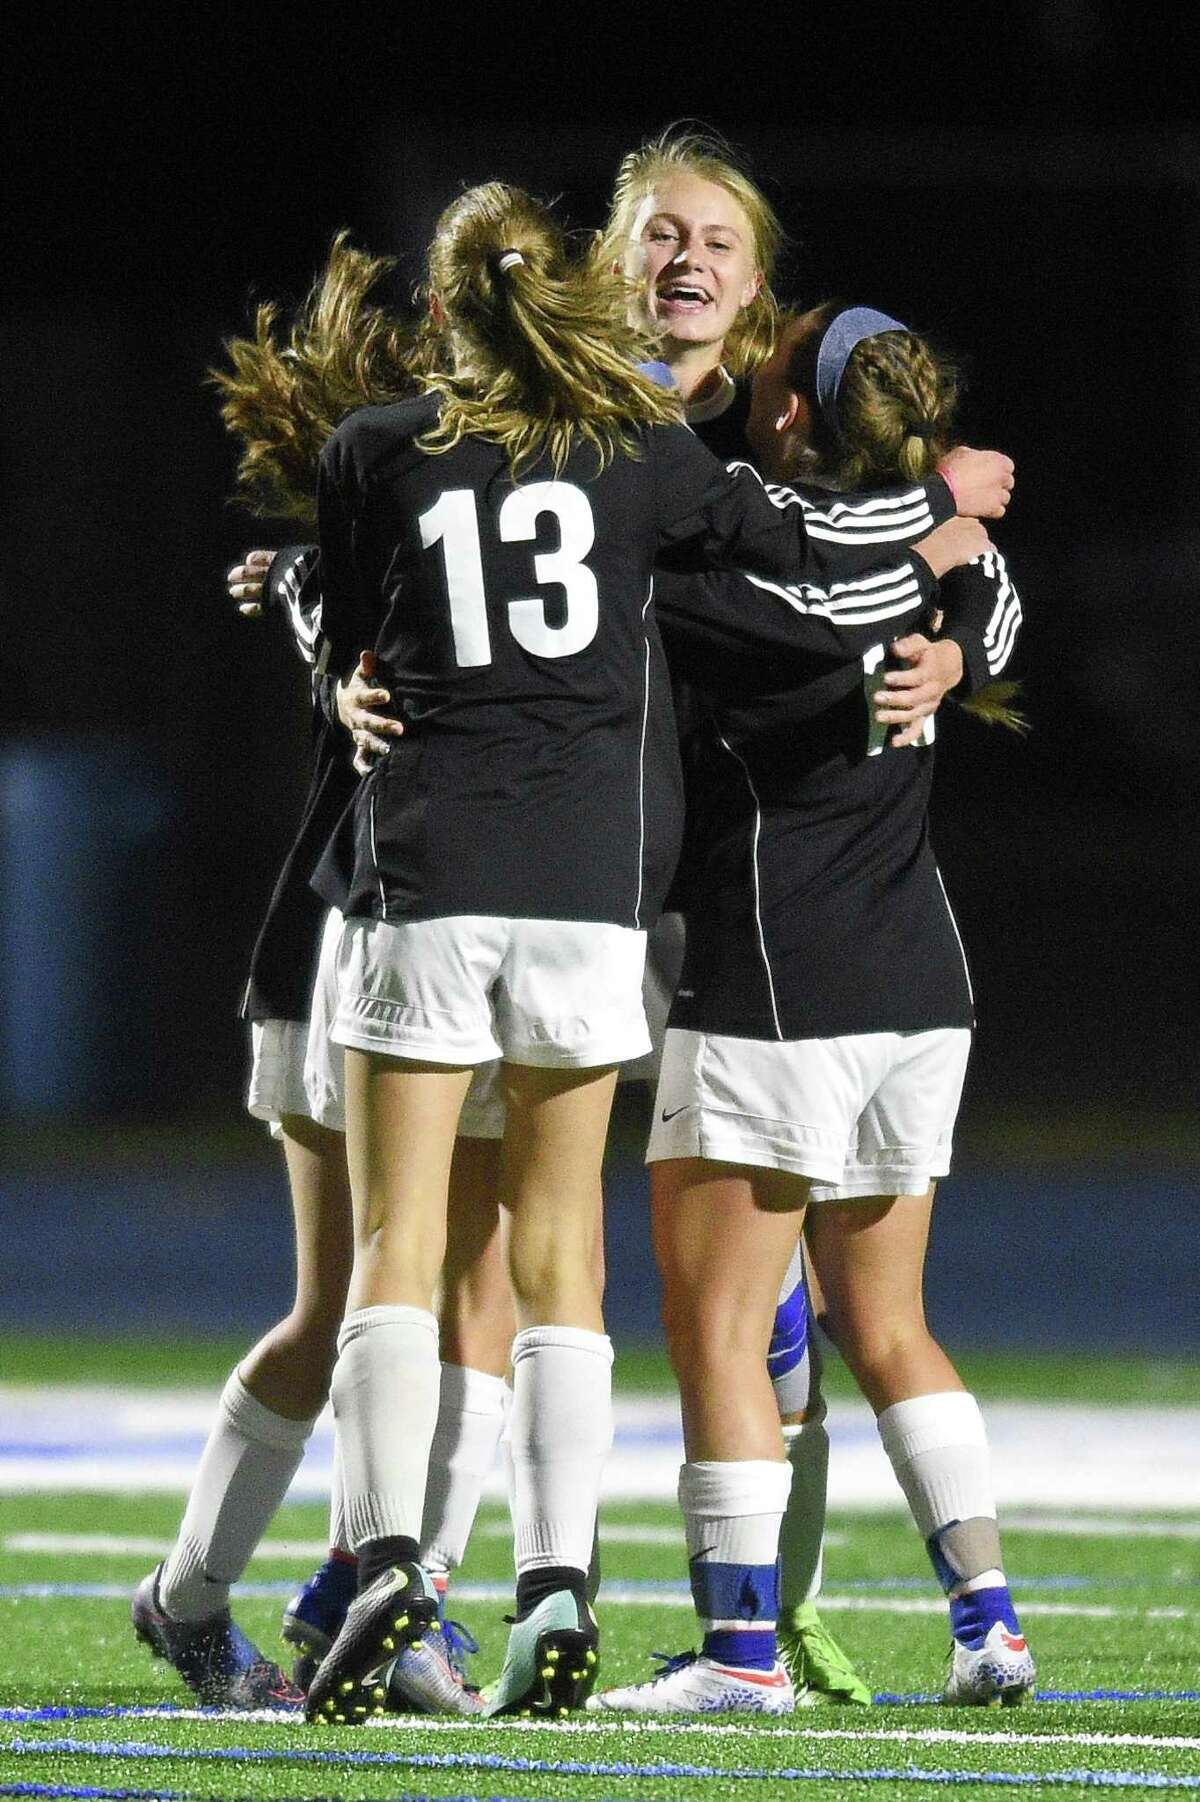 Darien Katie Ramsay (10), center, celebrates her game winning goal against Westhill with teammates Tuesday. Darien defeated Westhill 1-0.